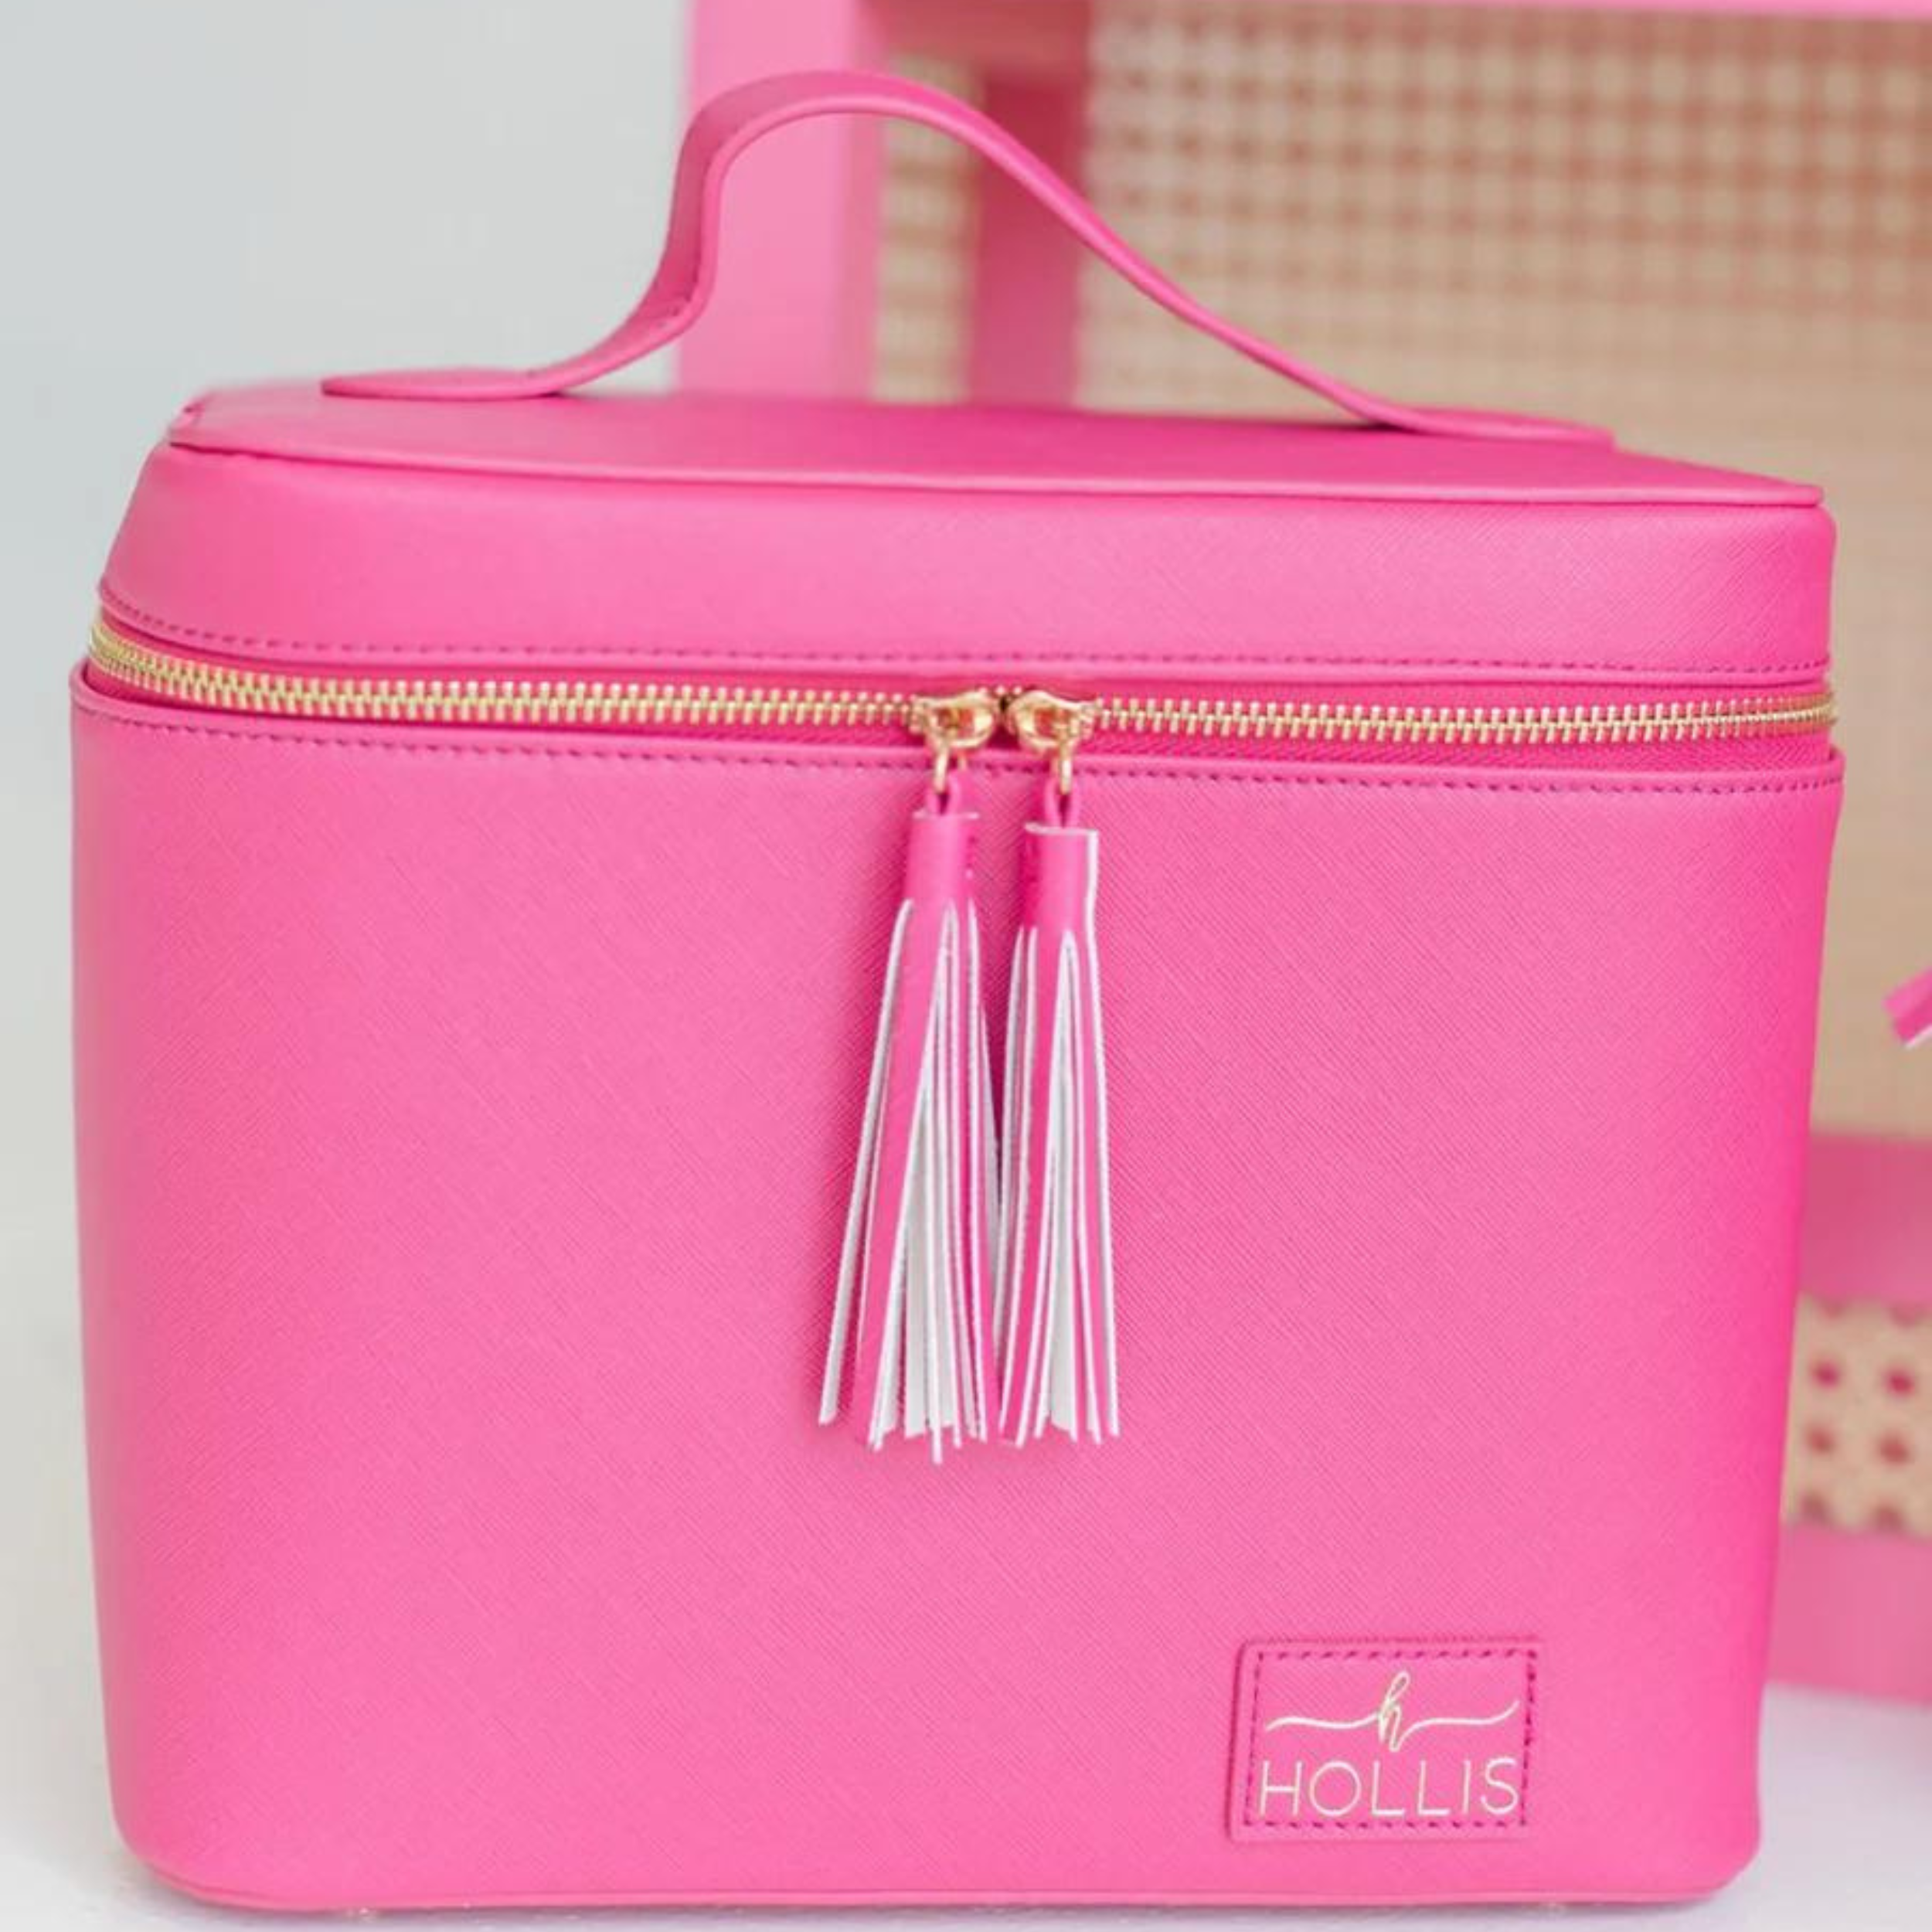 Hollis | Lux Bag in Hot Pink - Giddy Up Glamour Boutique